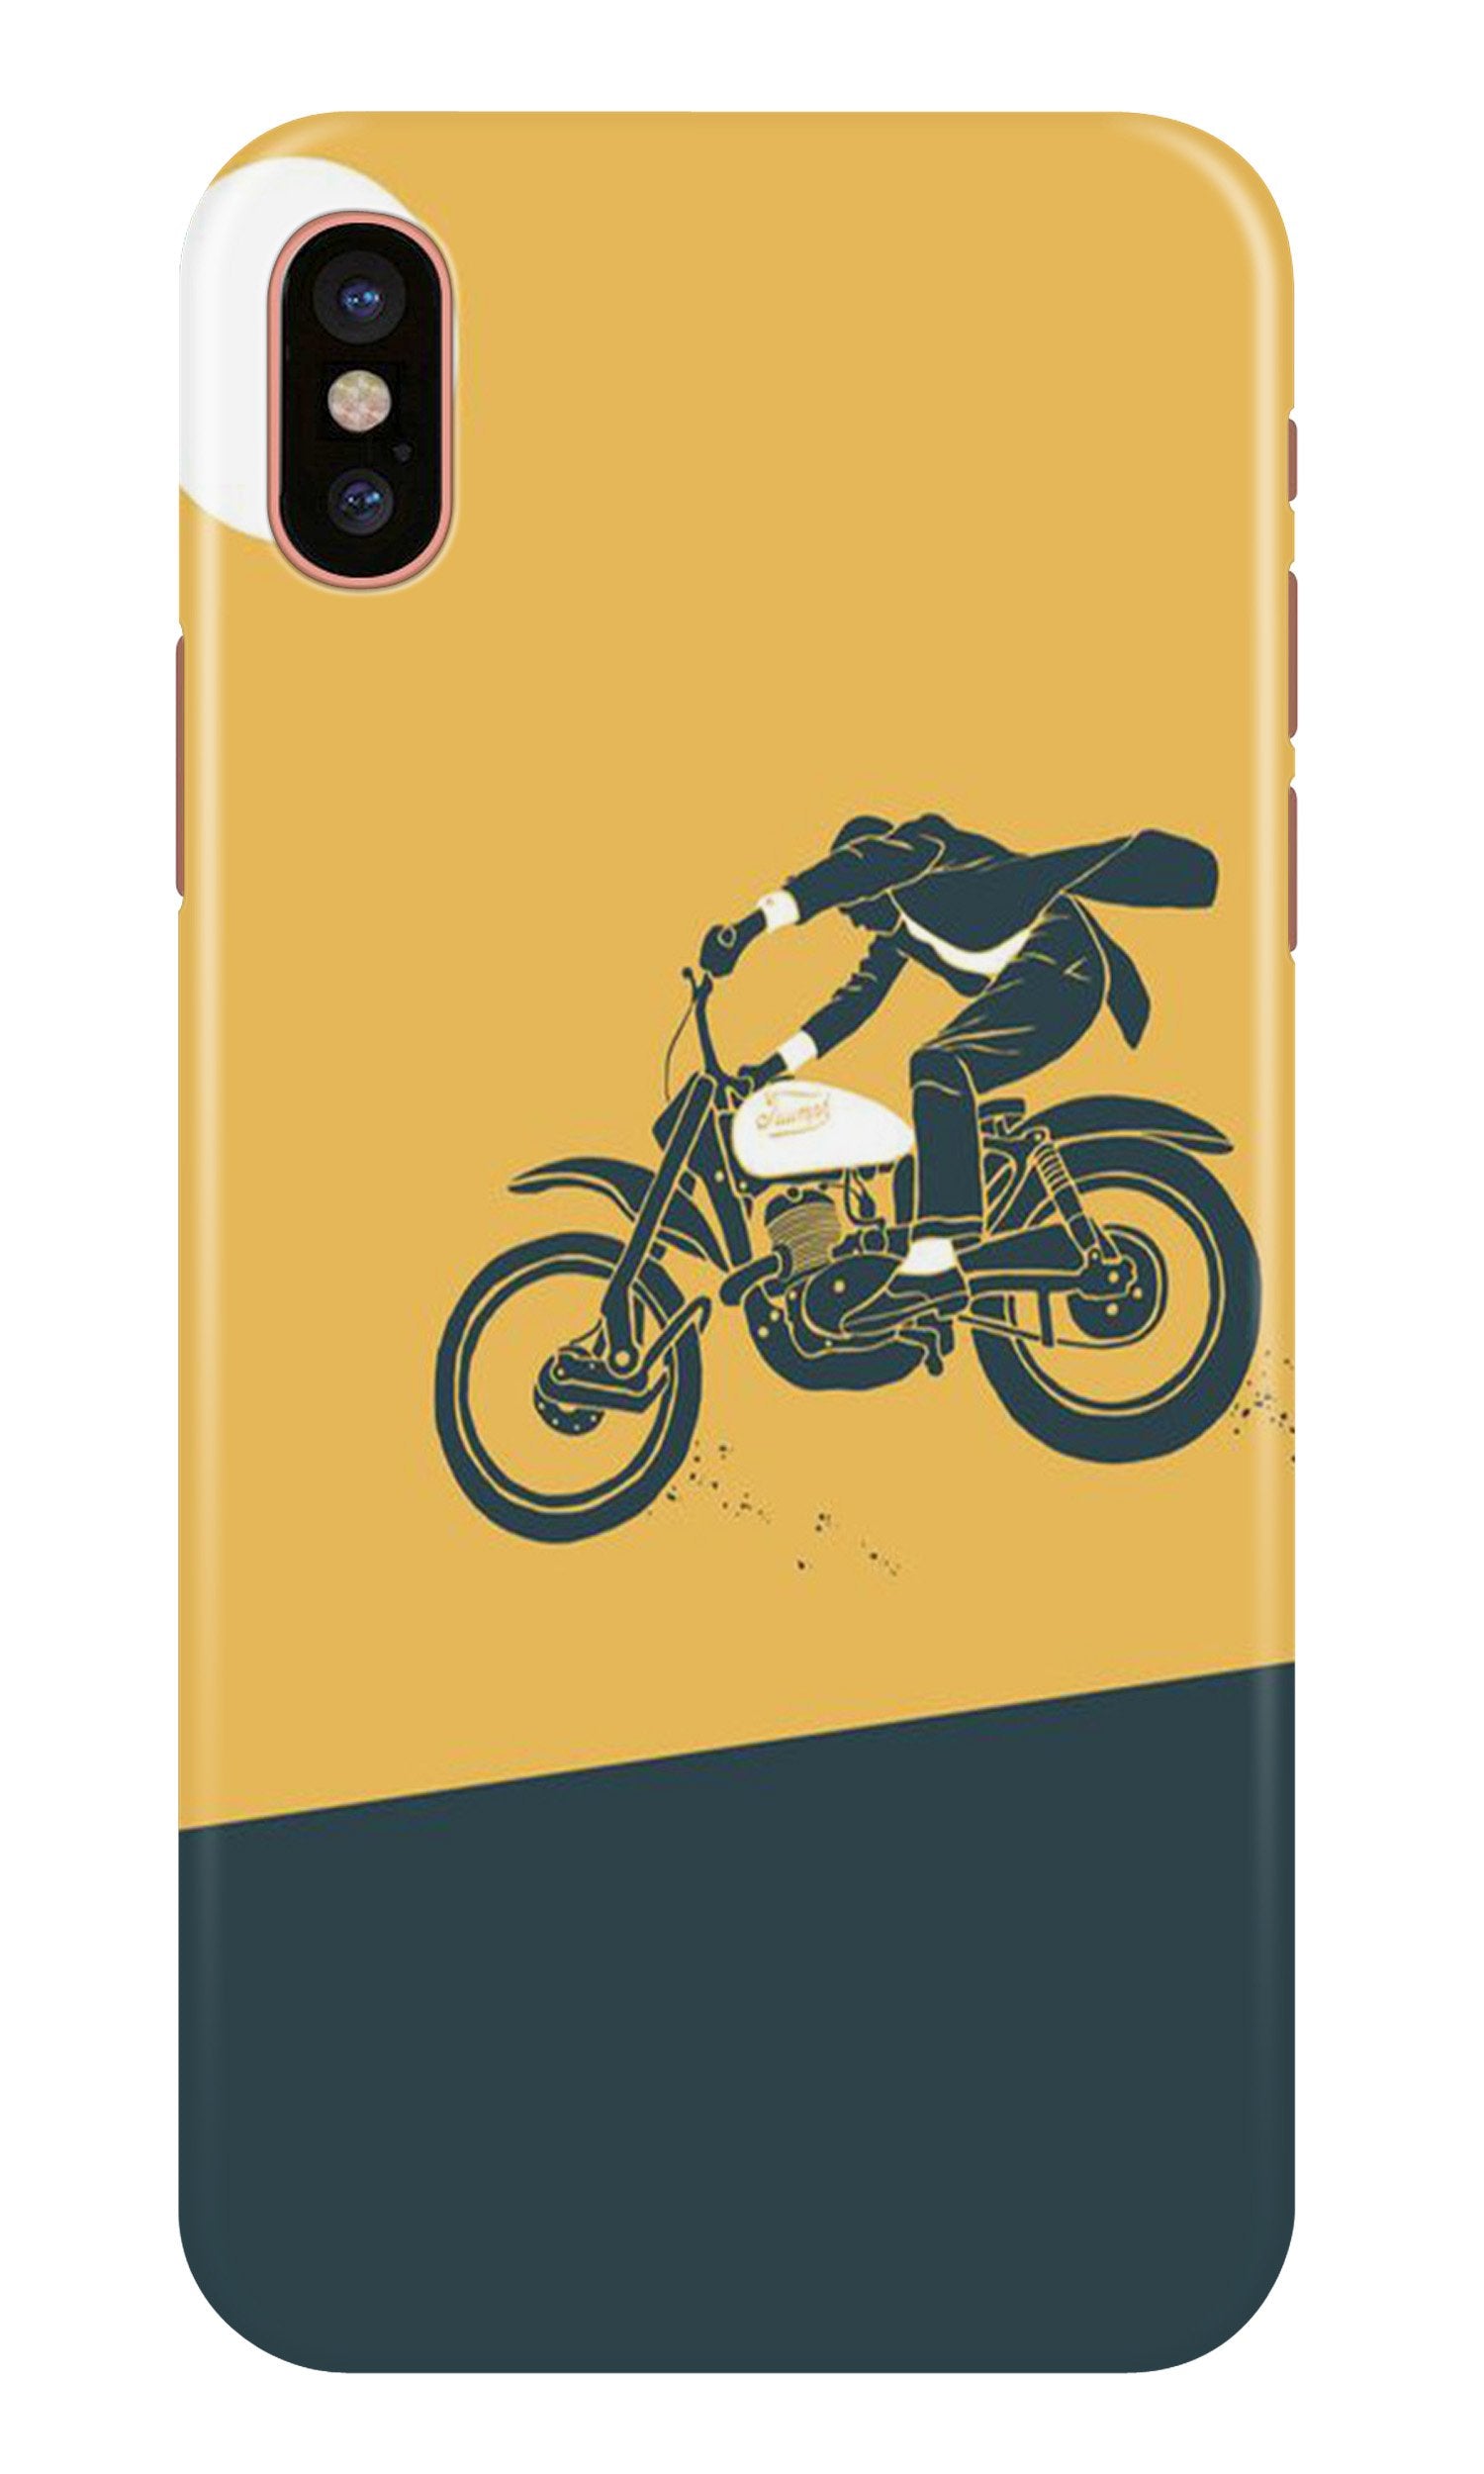 Bike Lovers Case for iPhone X (Design No. 256)